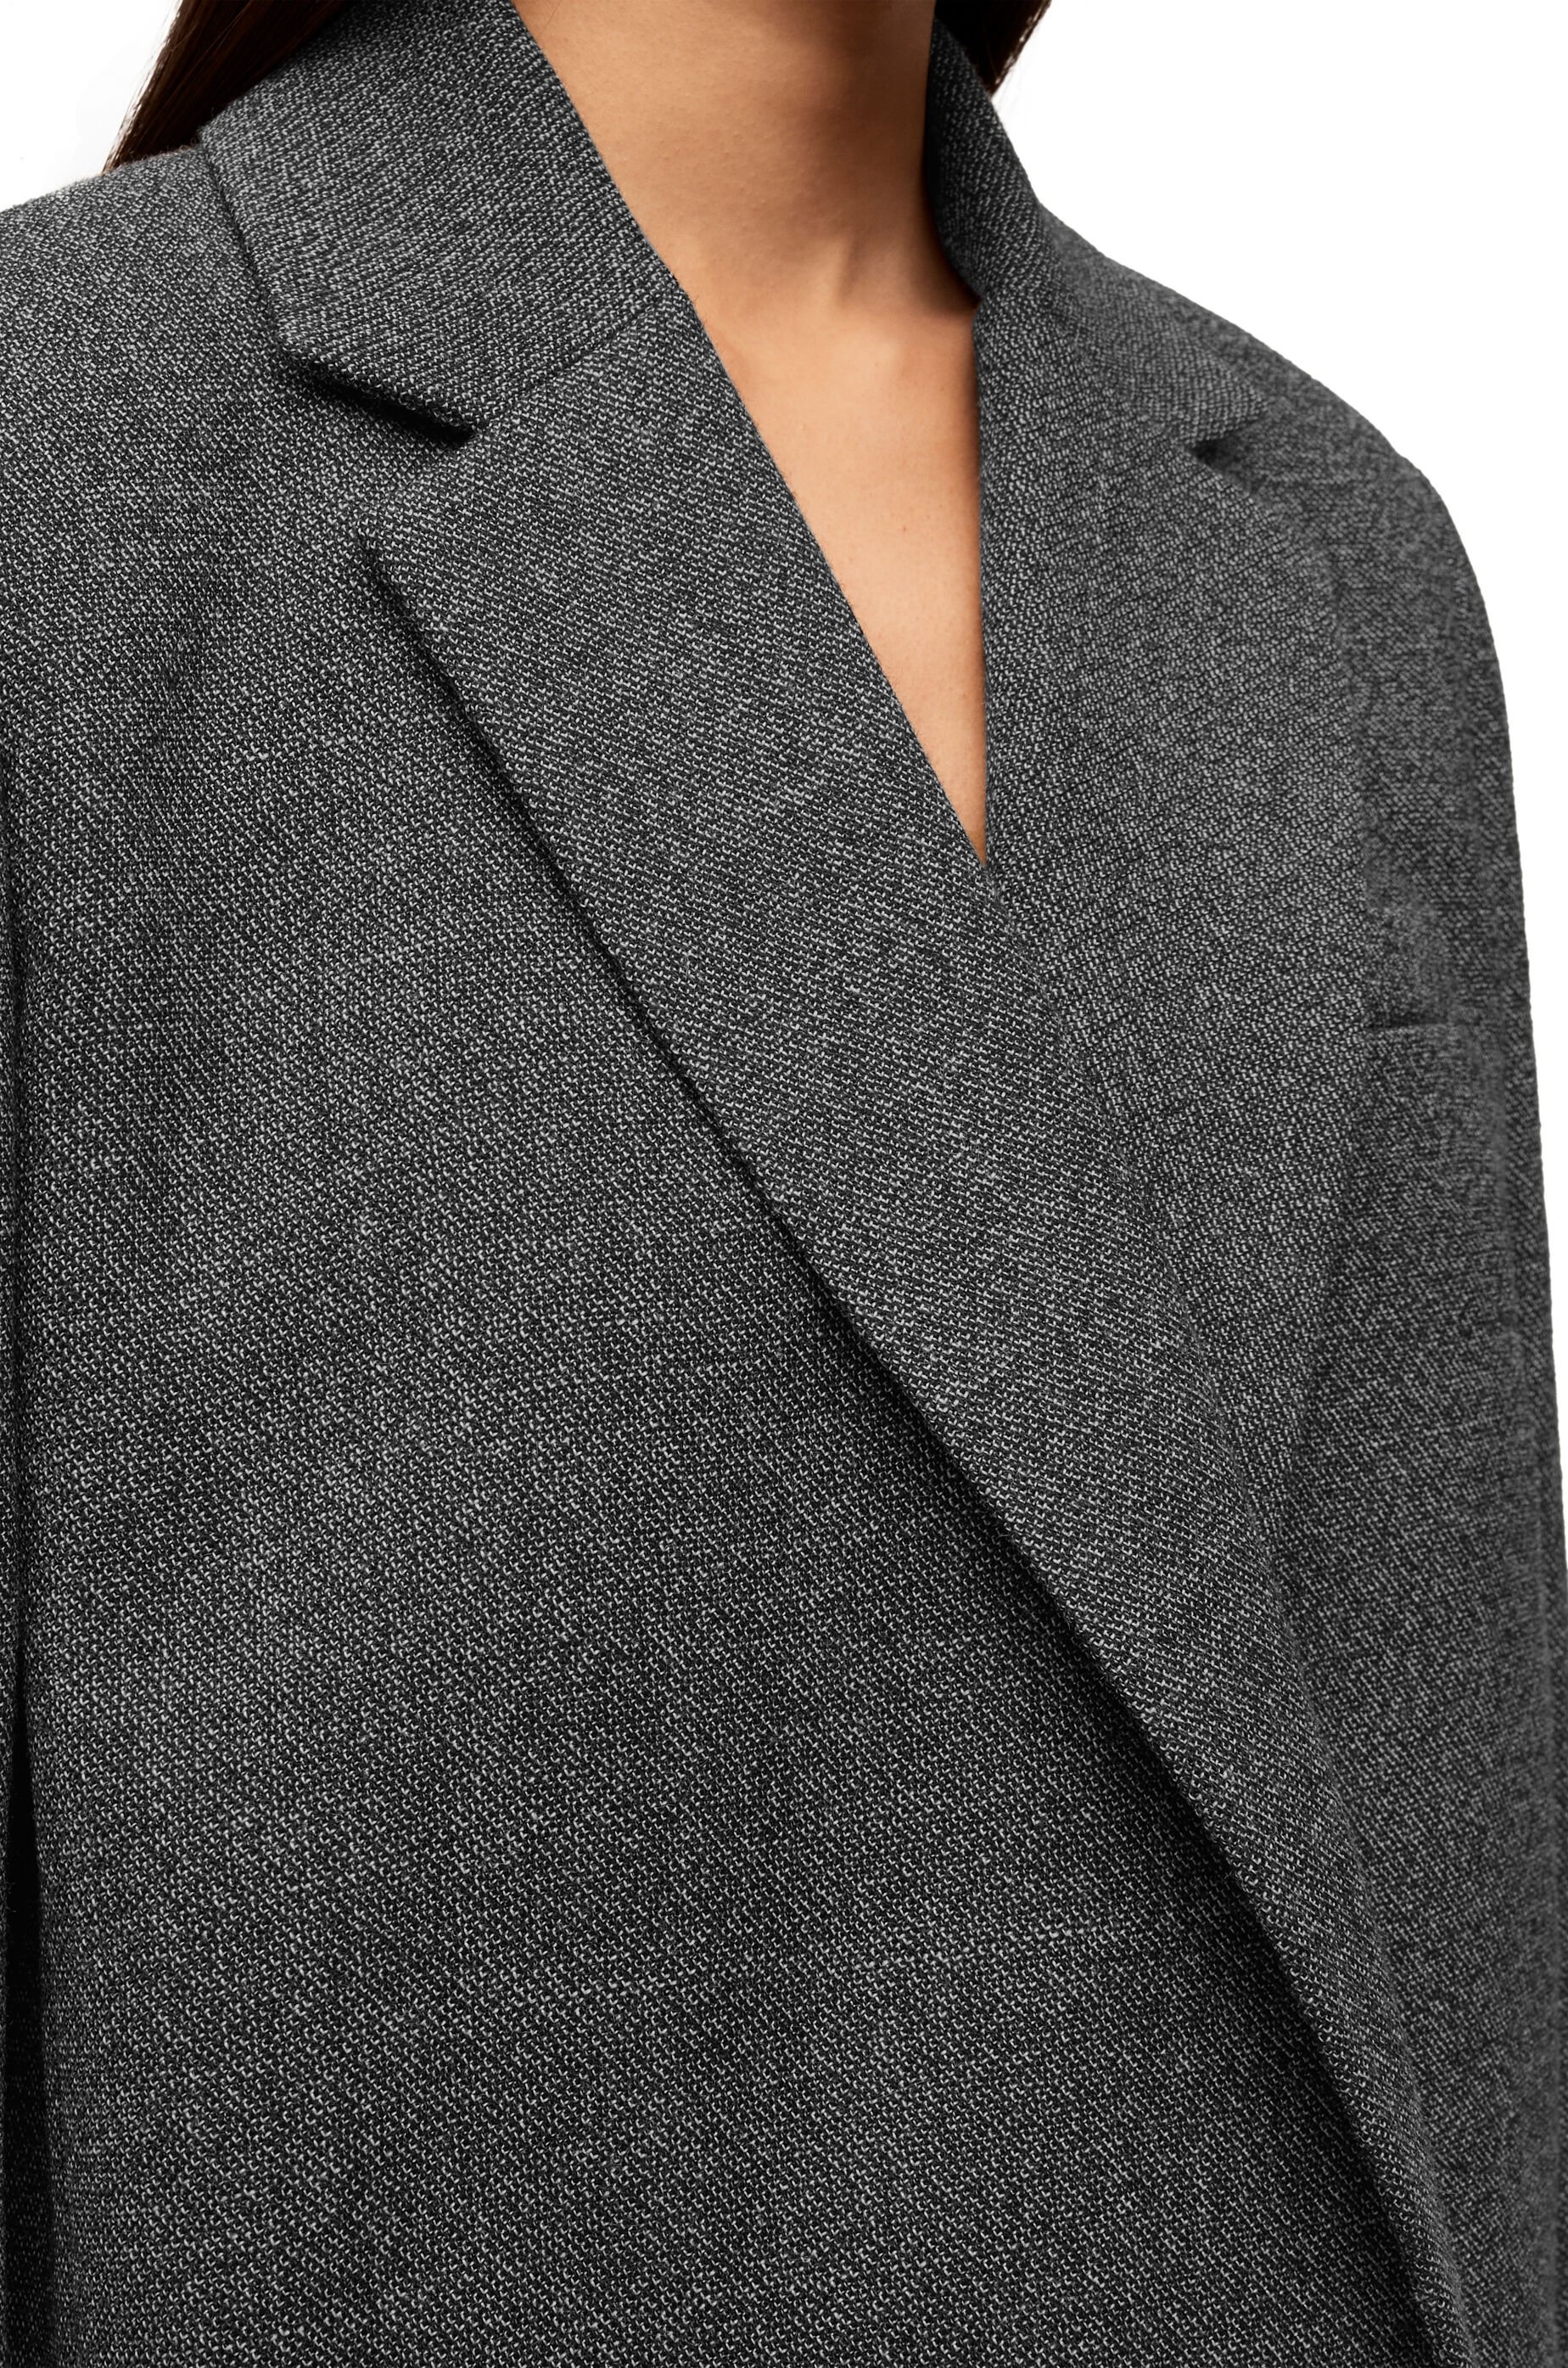 Tailored jacket in wool - 5